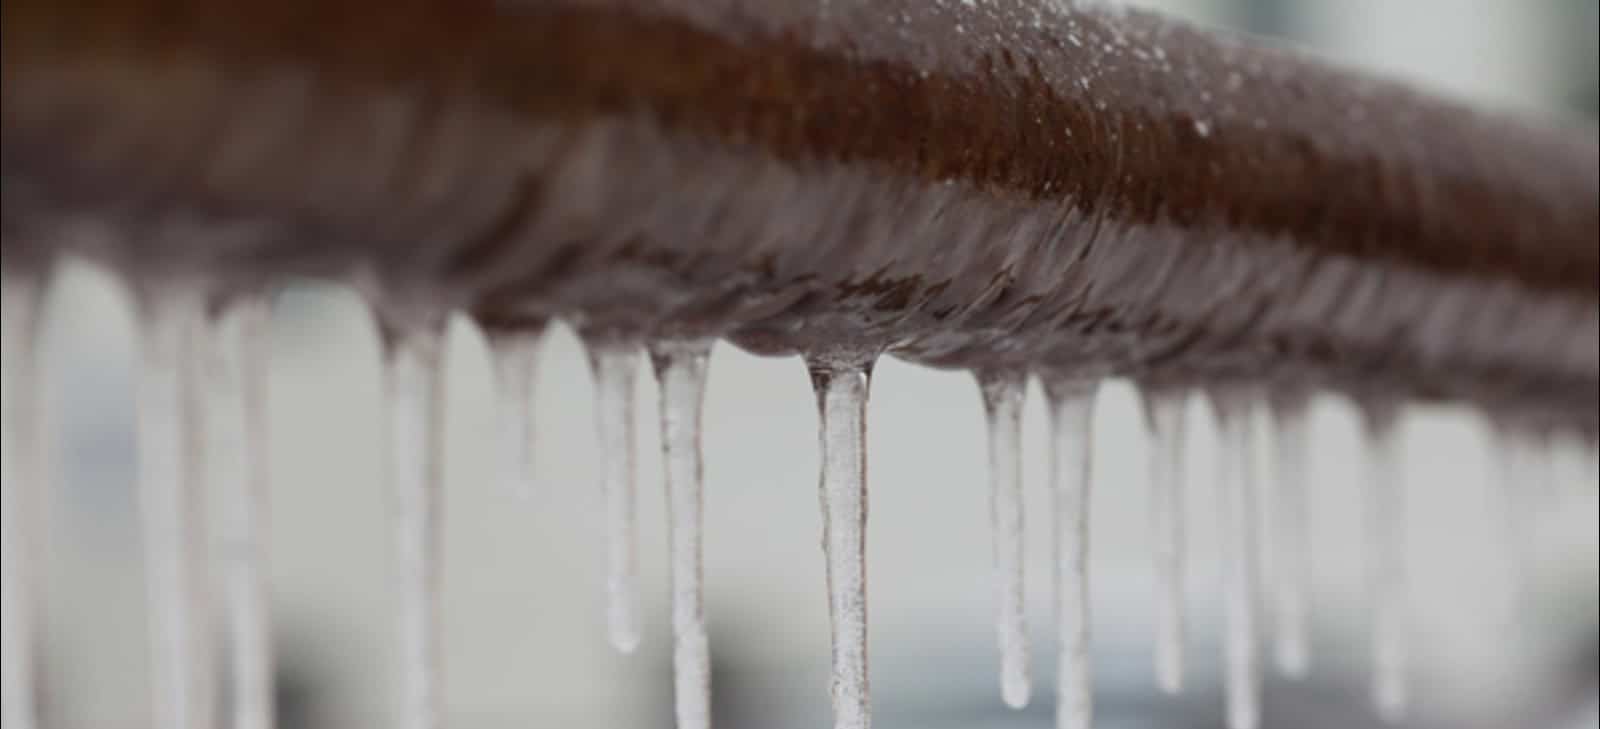 Tips To Prevent Frozen Pipes